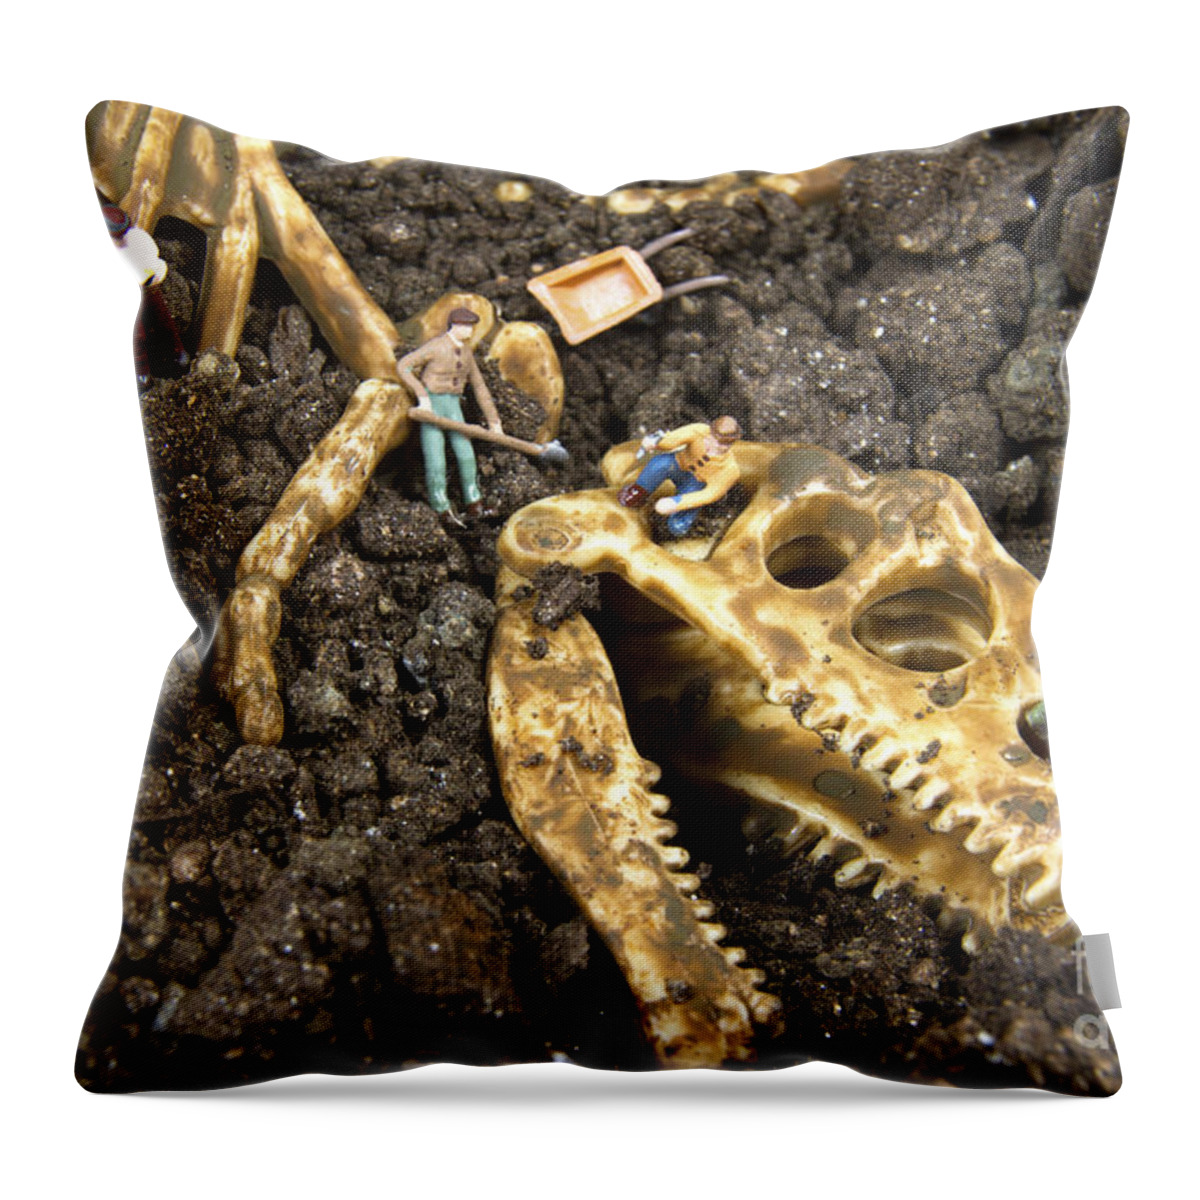 Ancient Throw Pillow featuring the photograph Archeology by Karen Foley